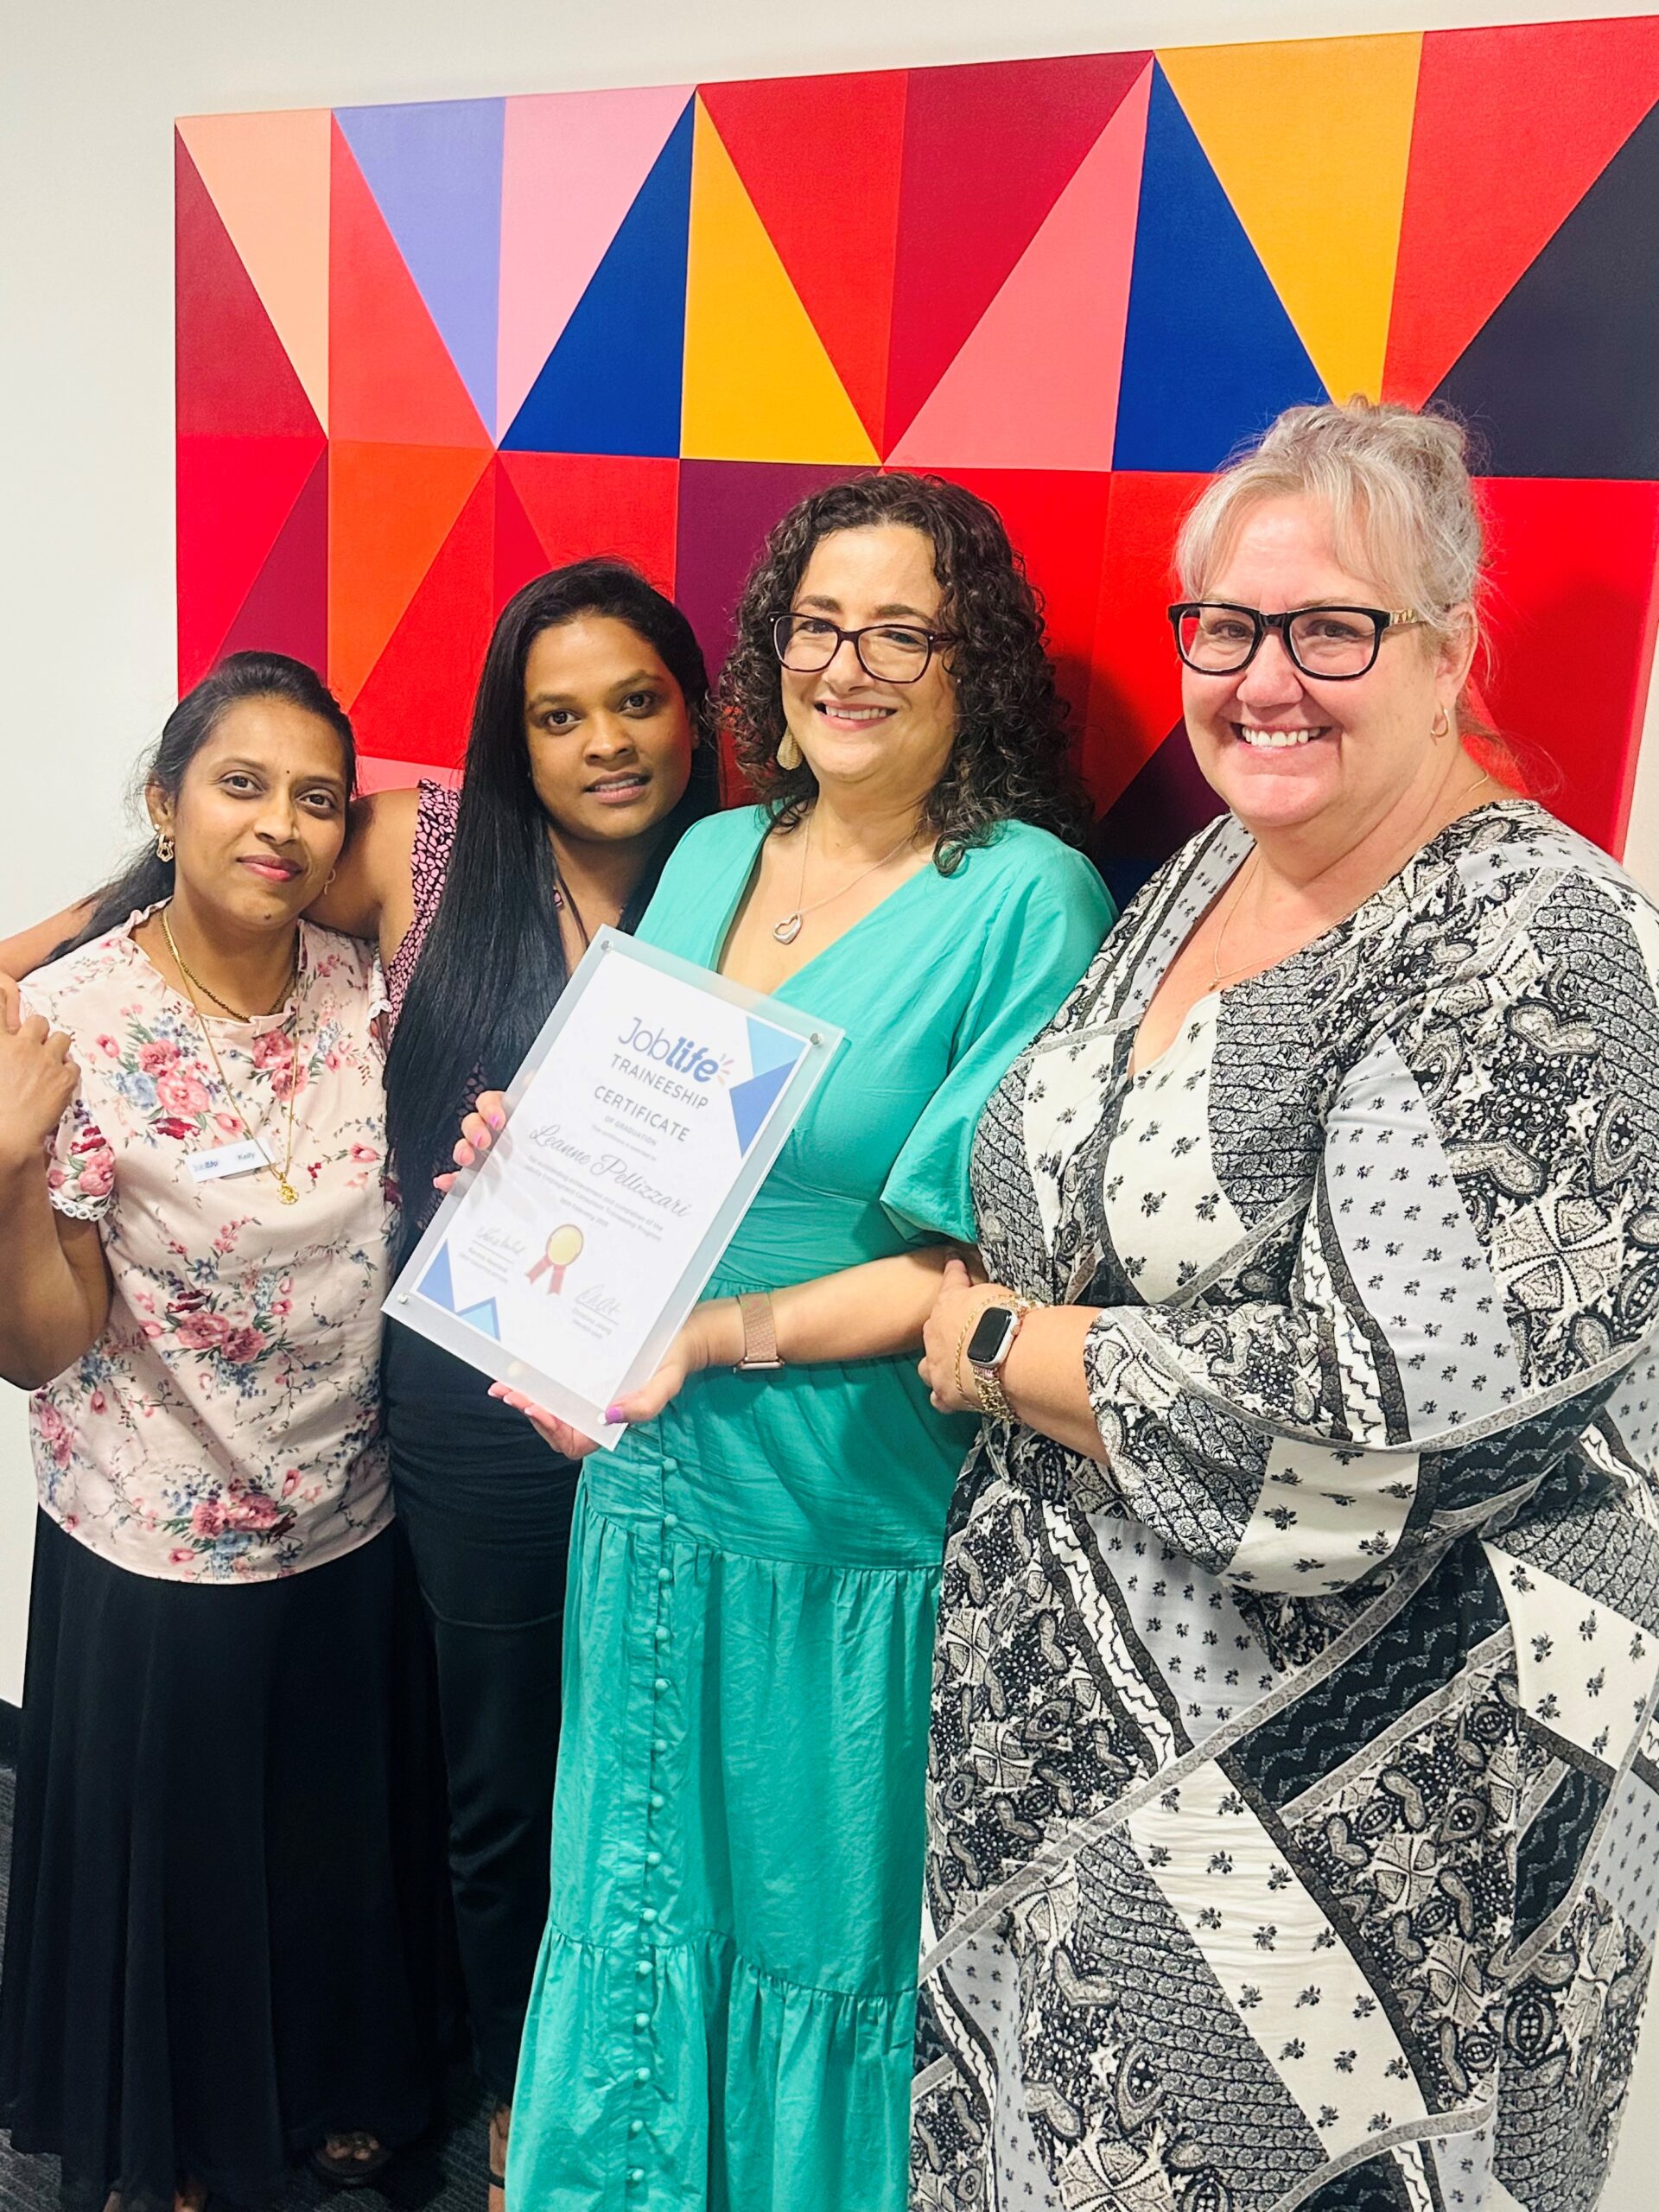 uLaunch - Four women from the traineeship program standing together and smiling - one of the women is holding a certificate.